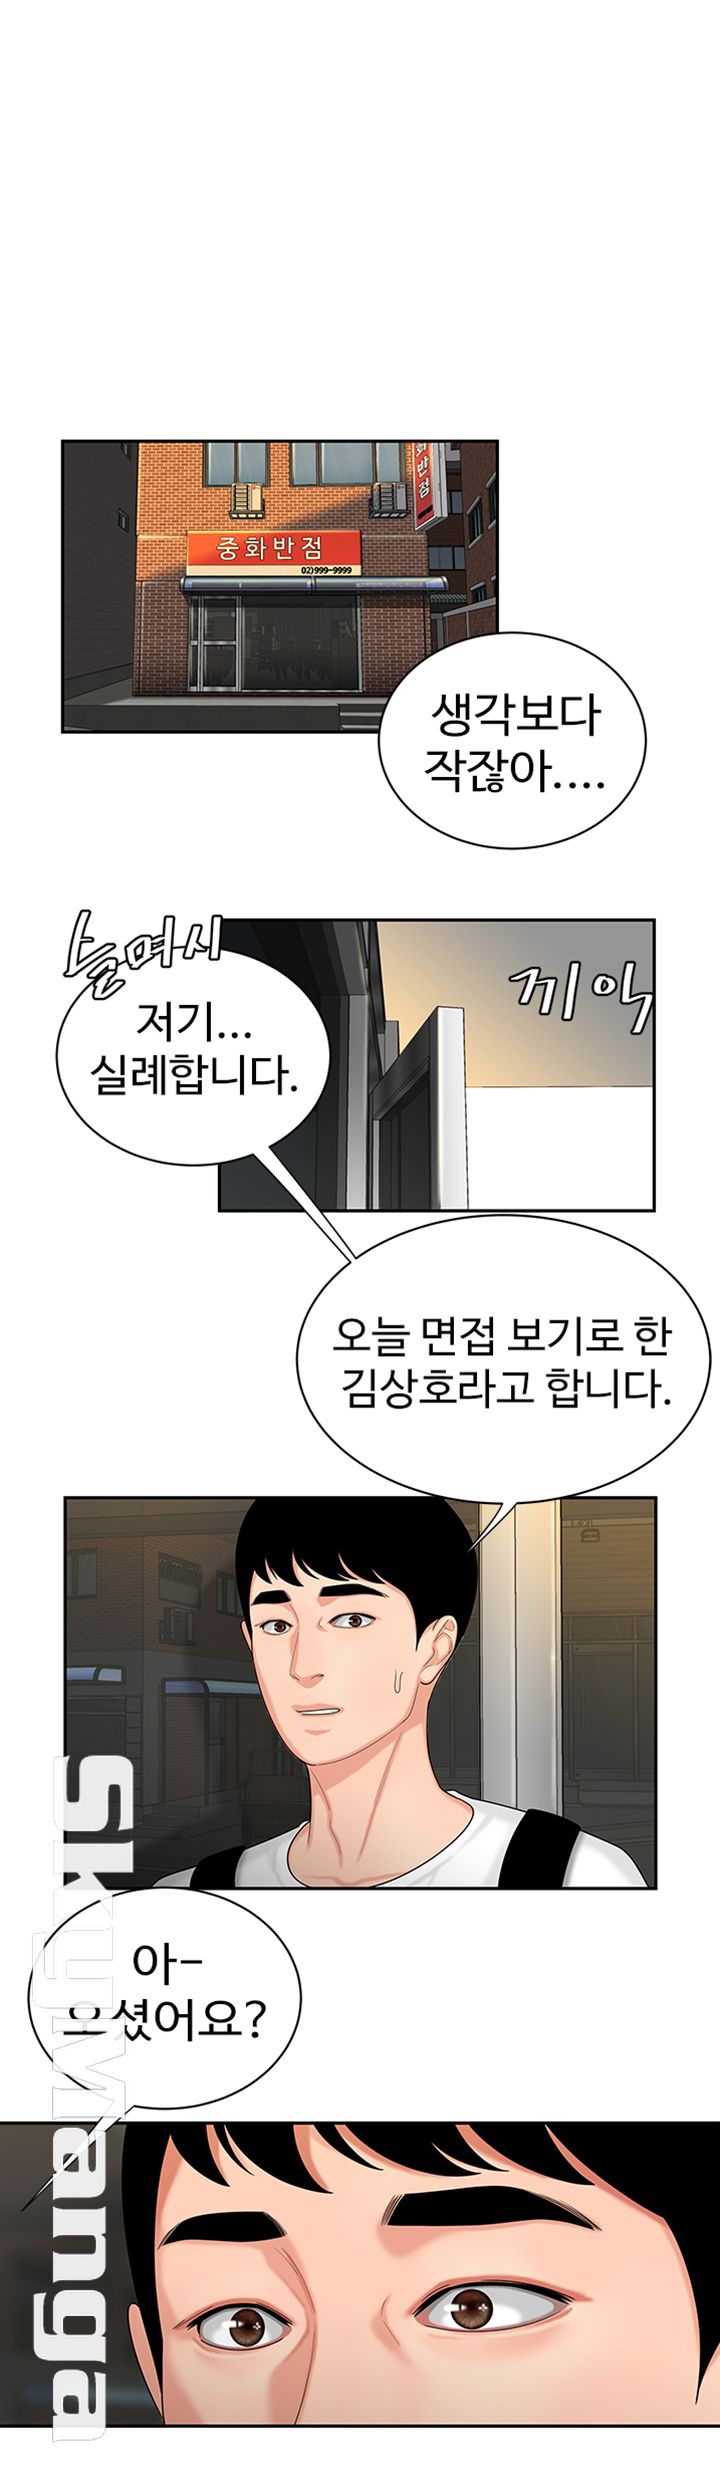 The Delivery Man Raw - Chapter 1 Page 3